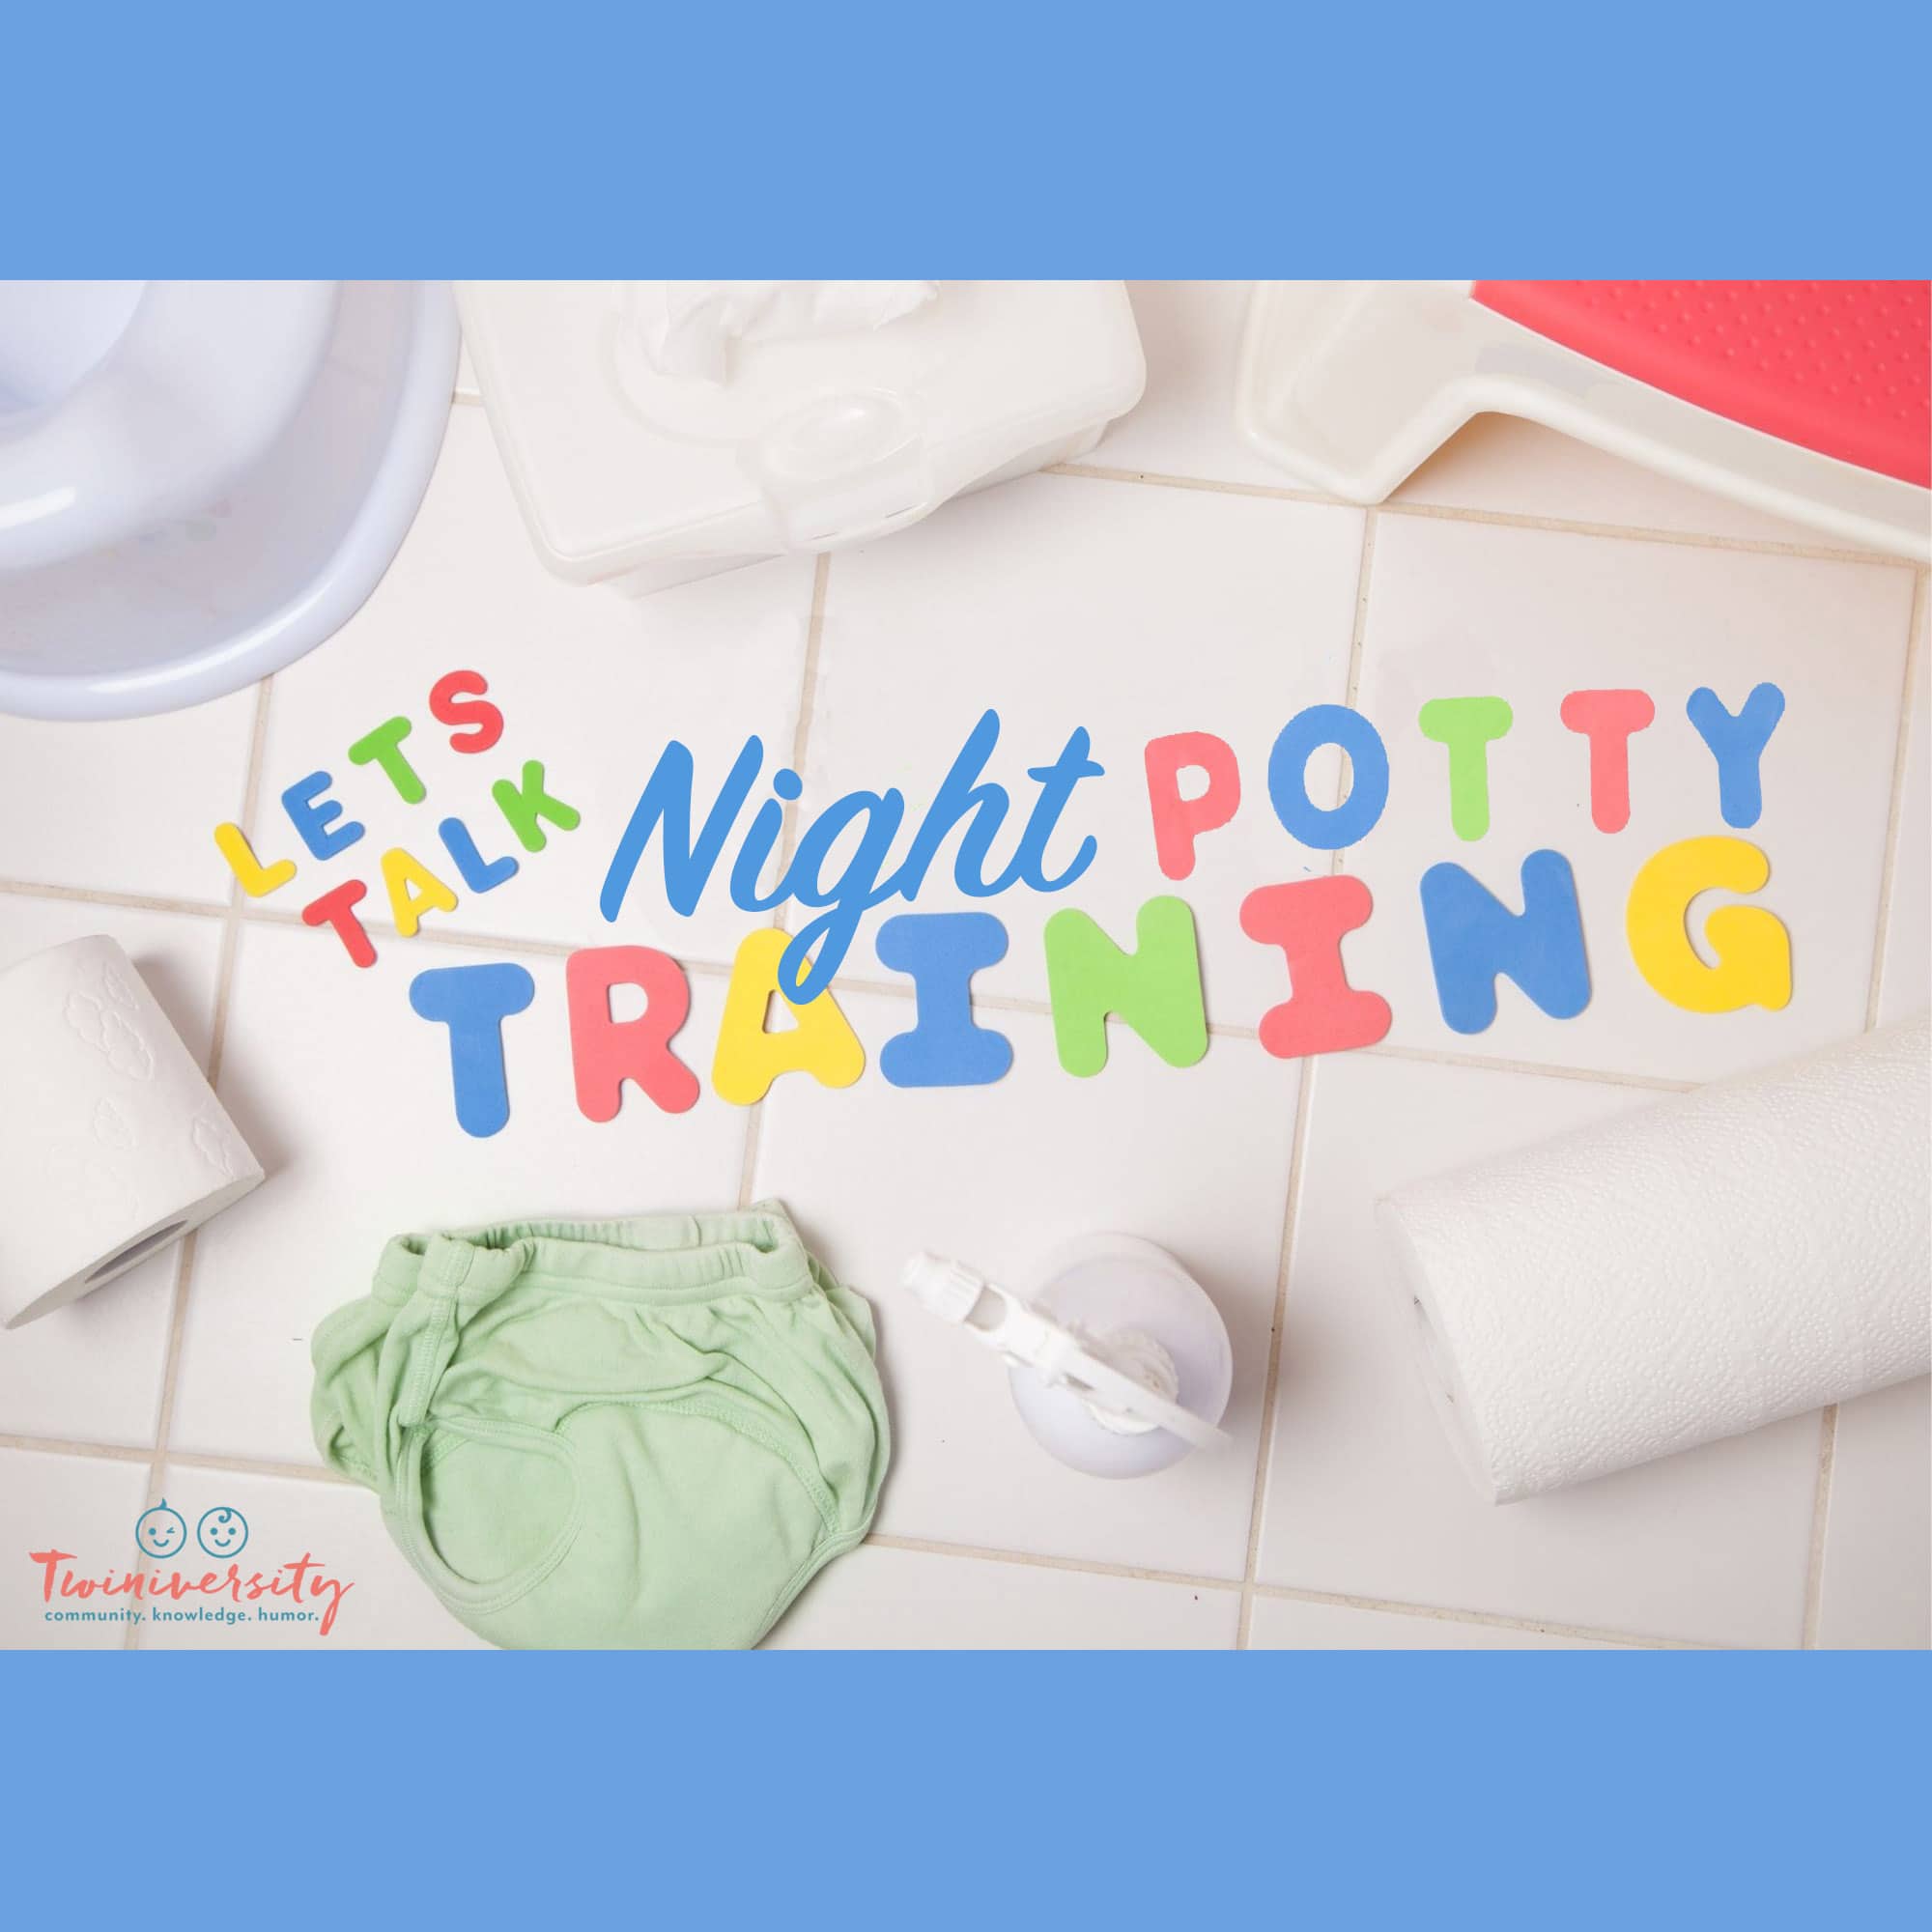 Nighttime Potty Training and Bedwetting: Can Your Toddler Be Potty